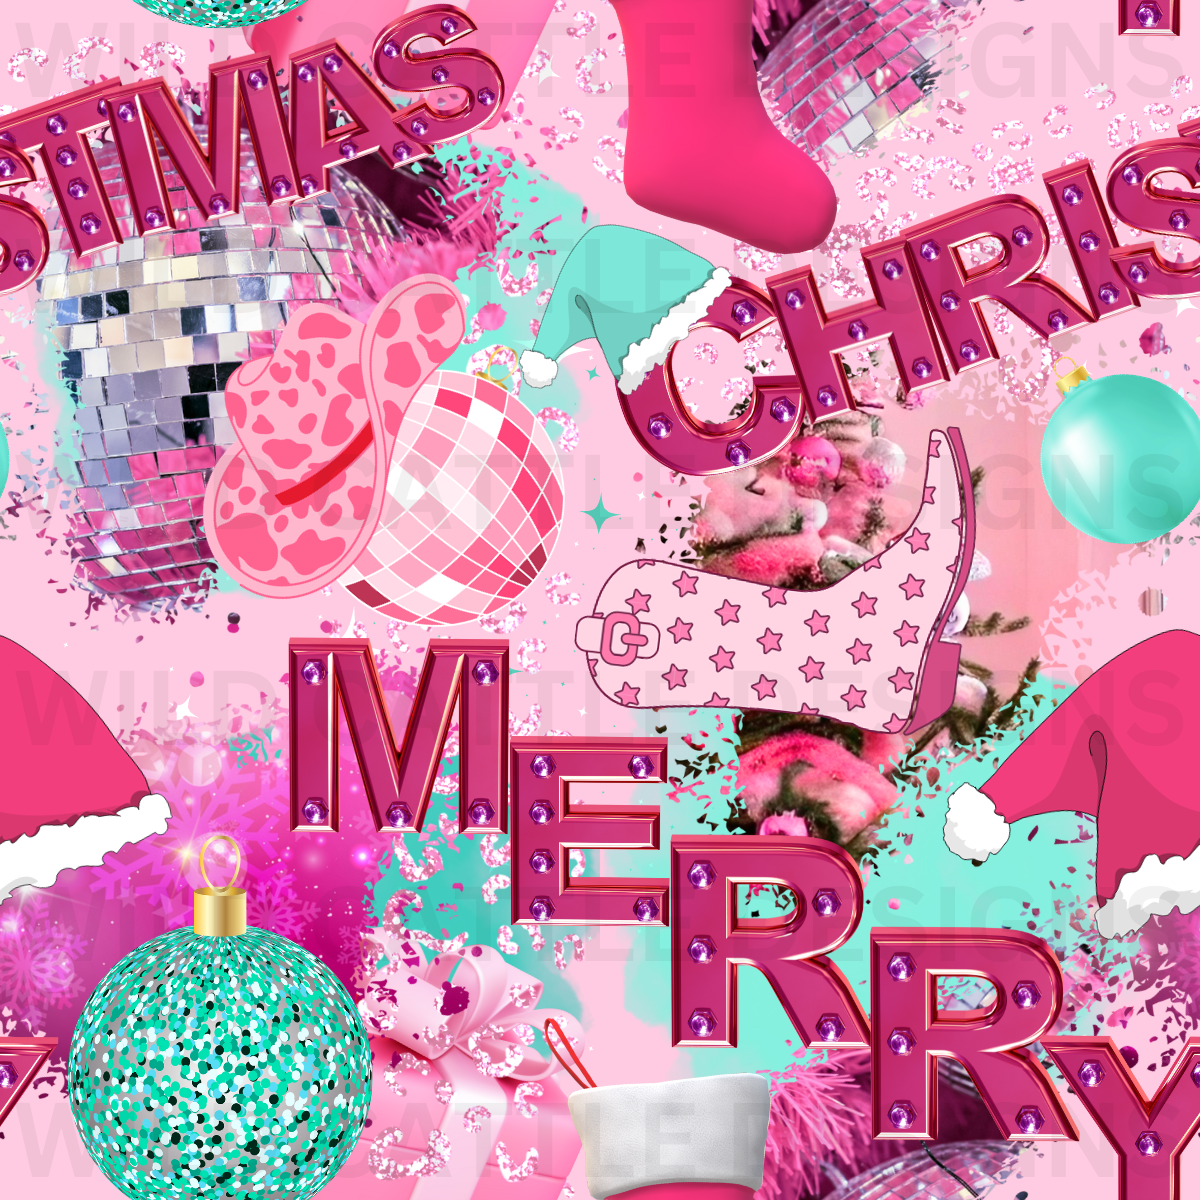 Merry Christmas Pink Collage Seamless